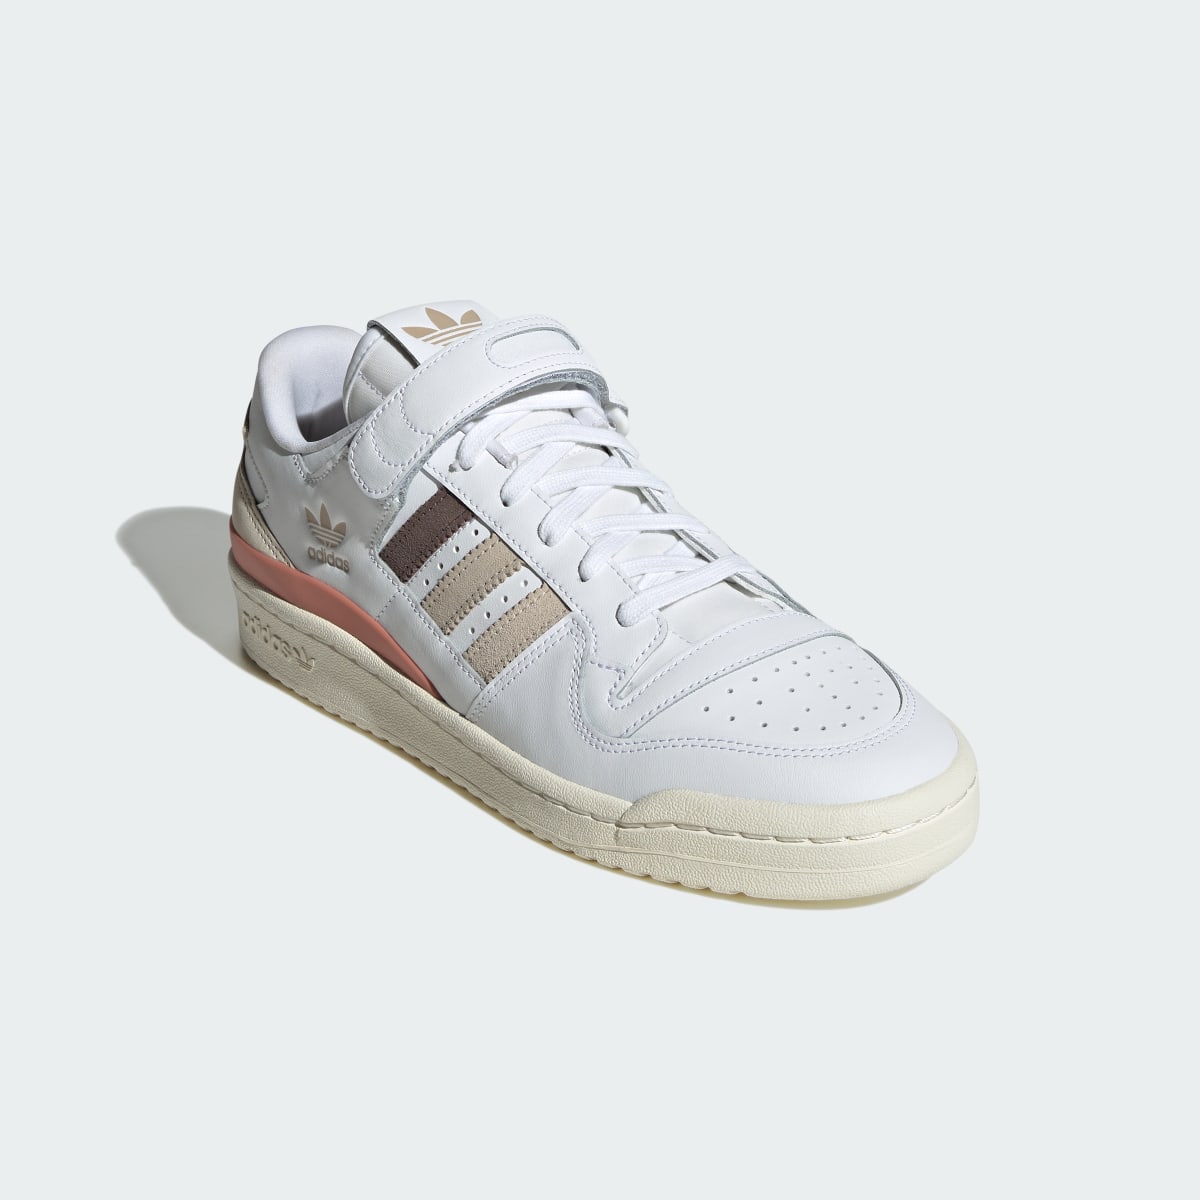 Adidas Forum 84 Low Shoes. 5